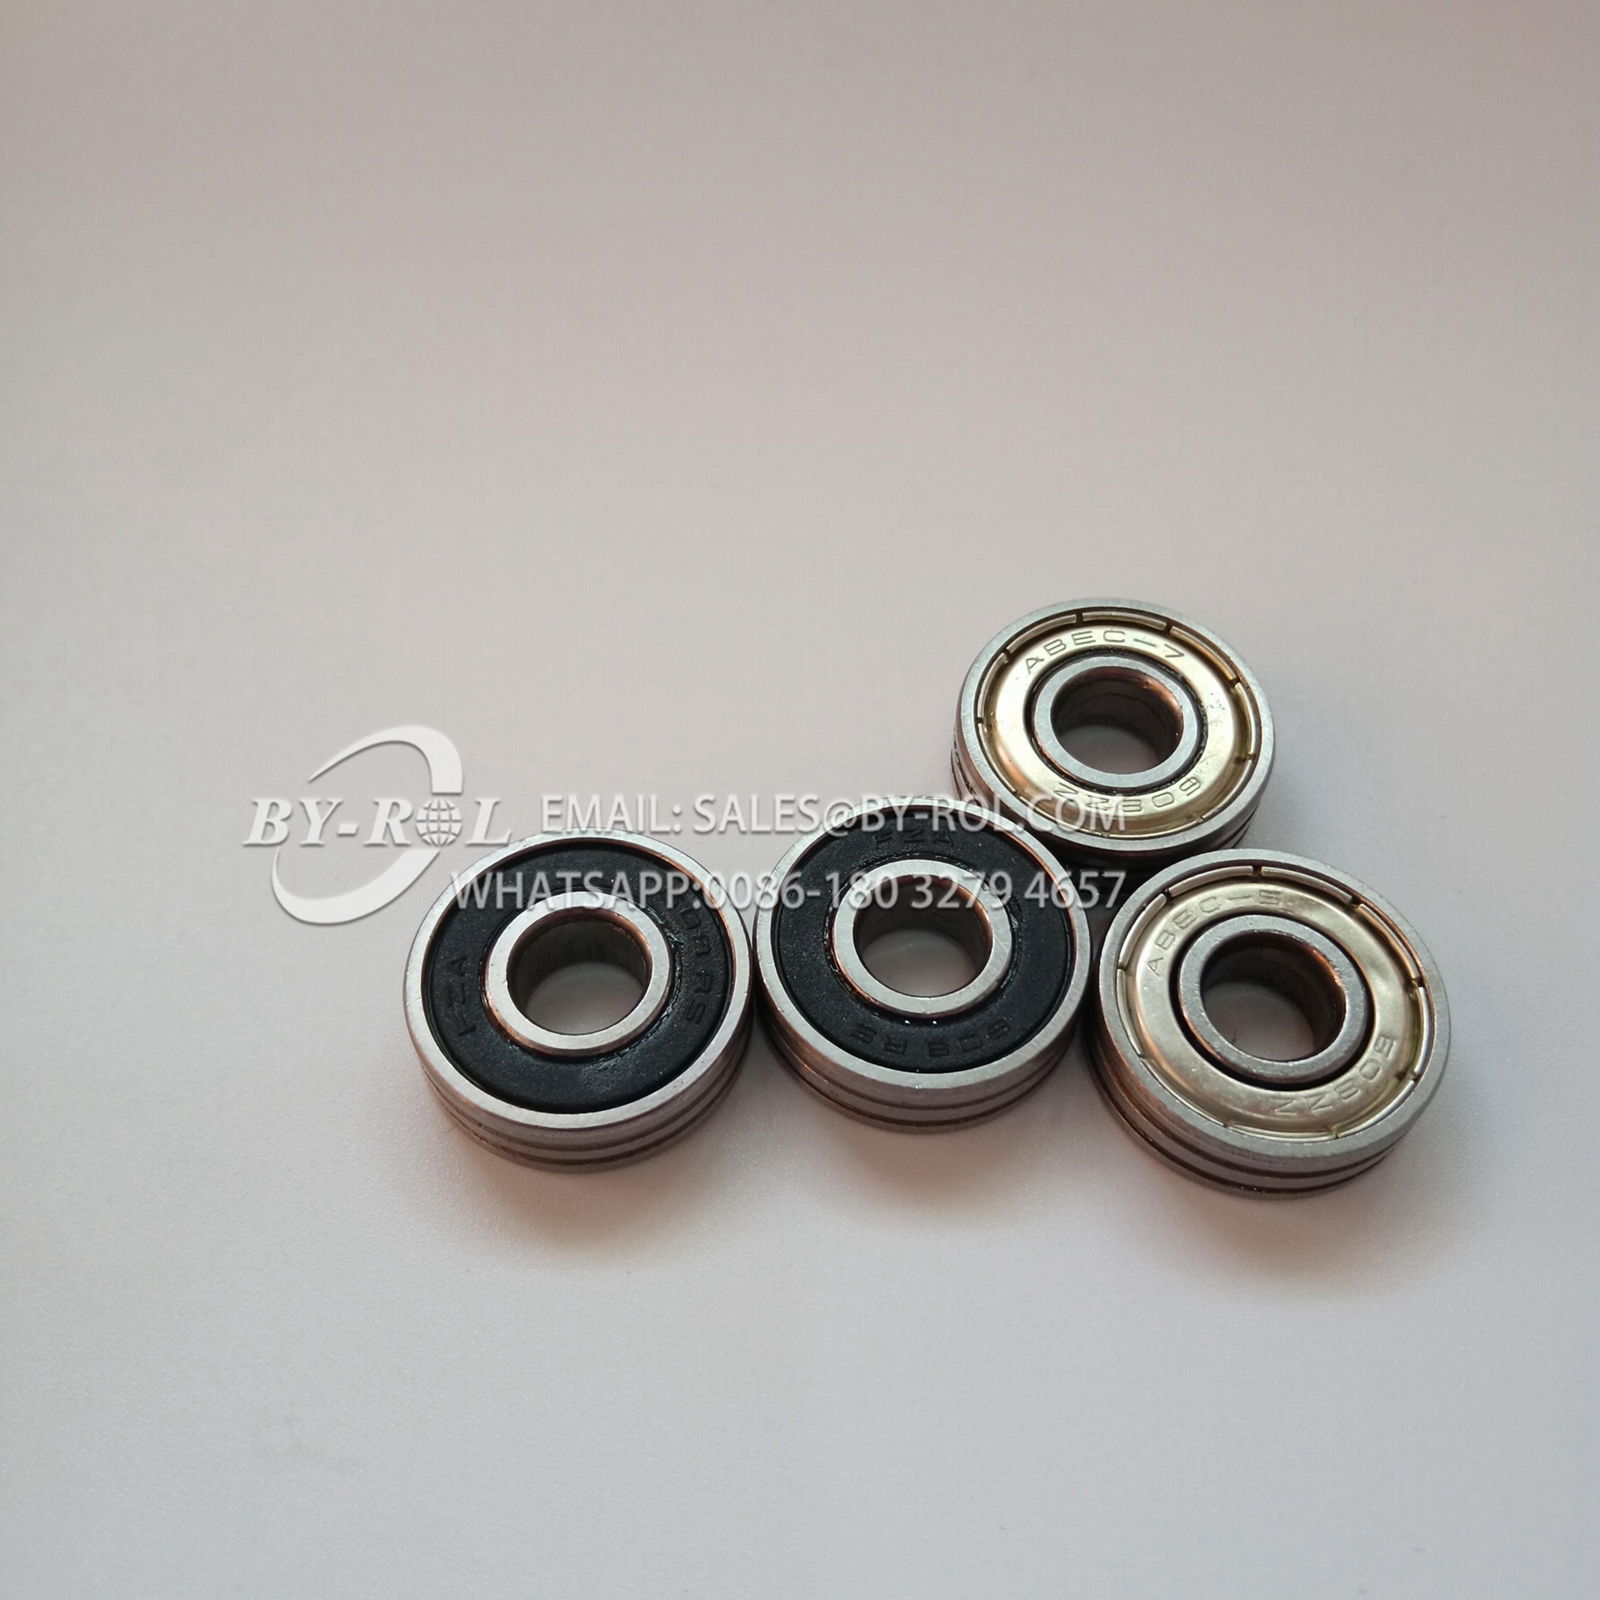 608 608RS 608ZZ 608-2RS 608ZZN 608-2RSN Door Window Rollers Bearing Two Slots 4